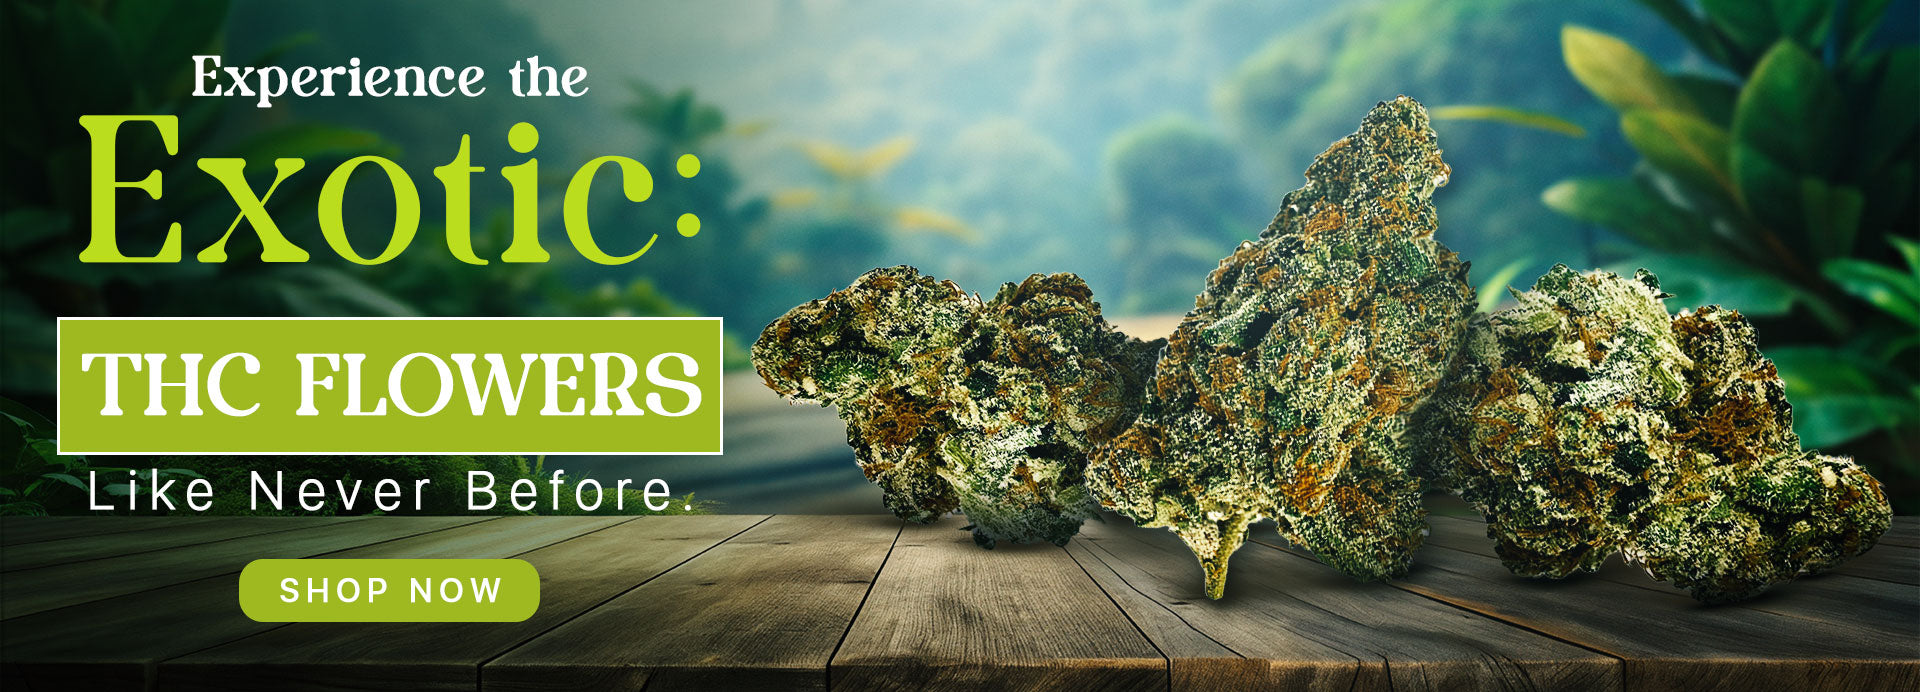 exotic thc flowers home page banner desktop